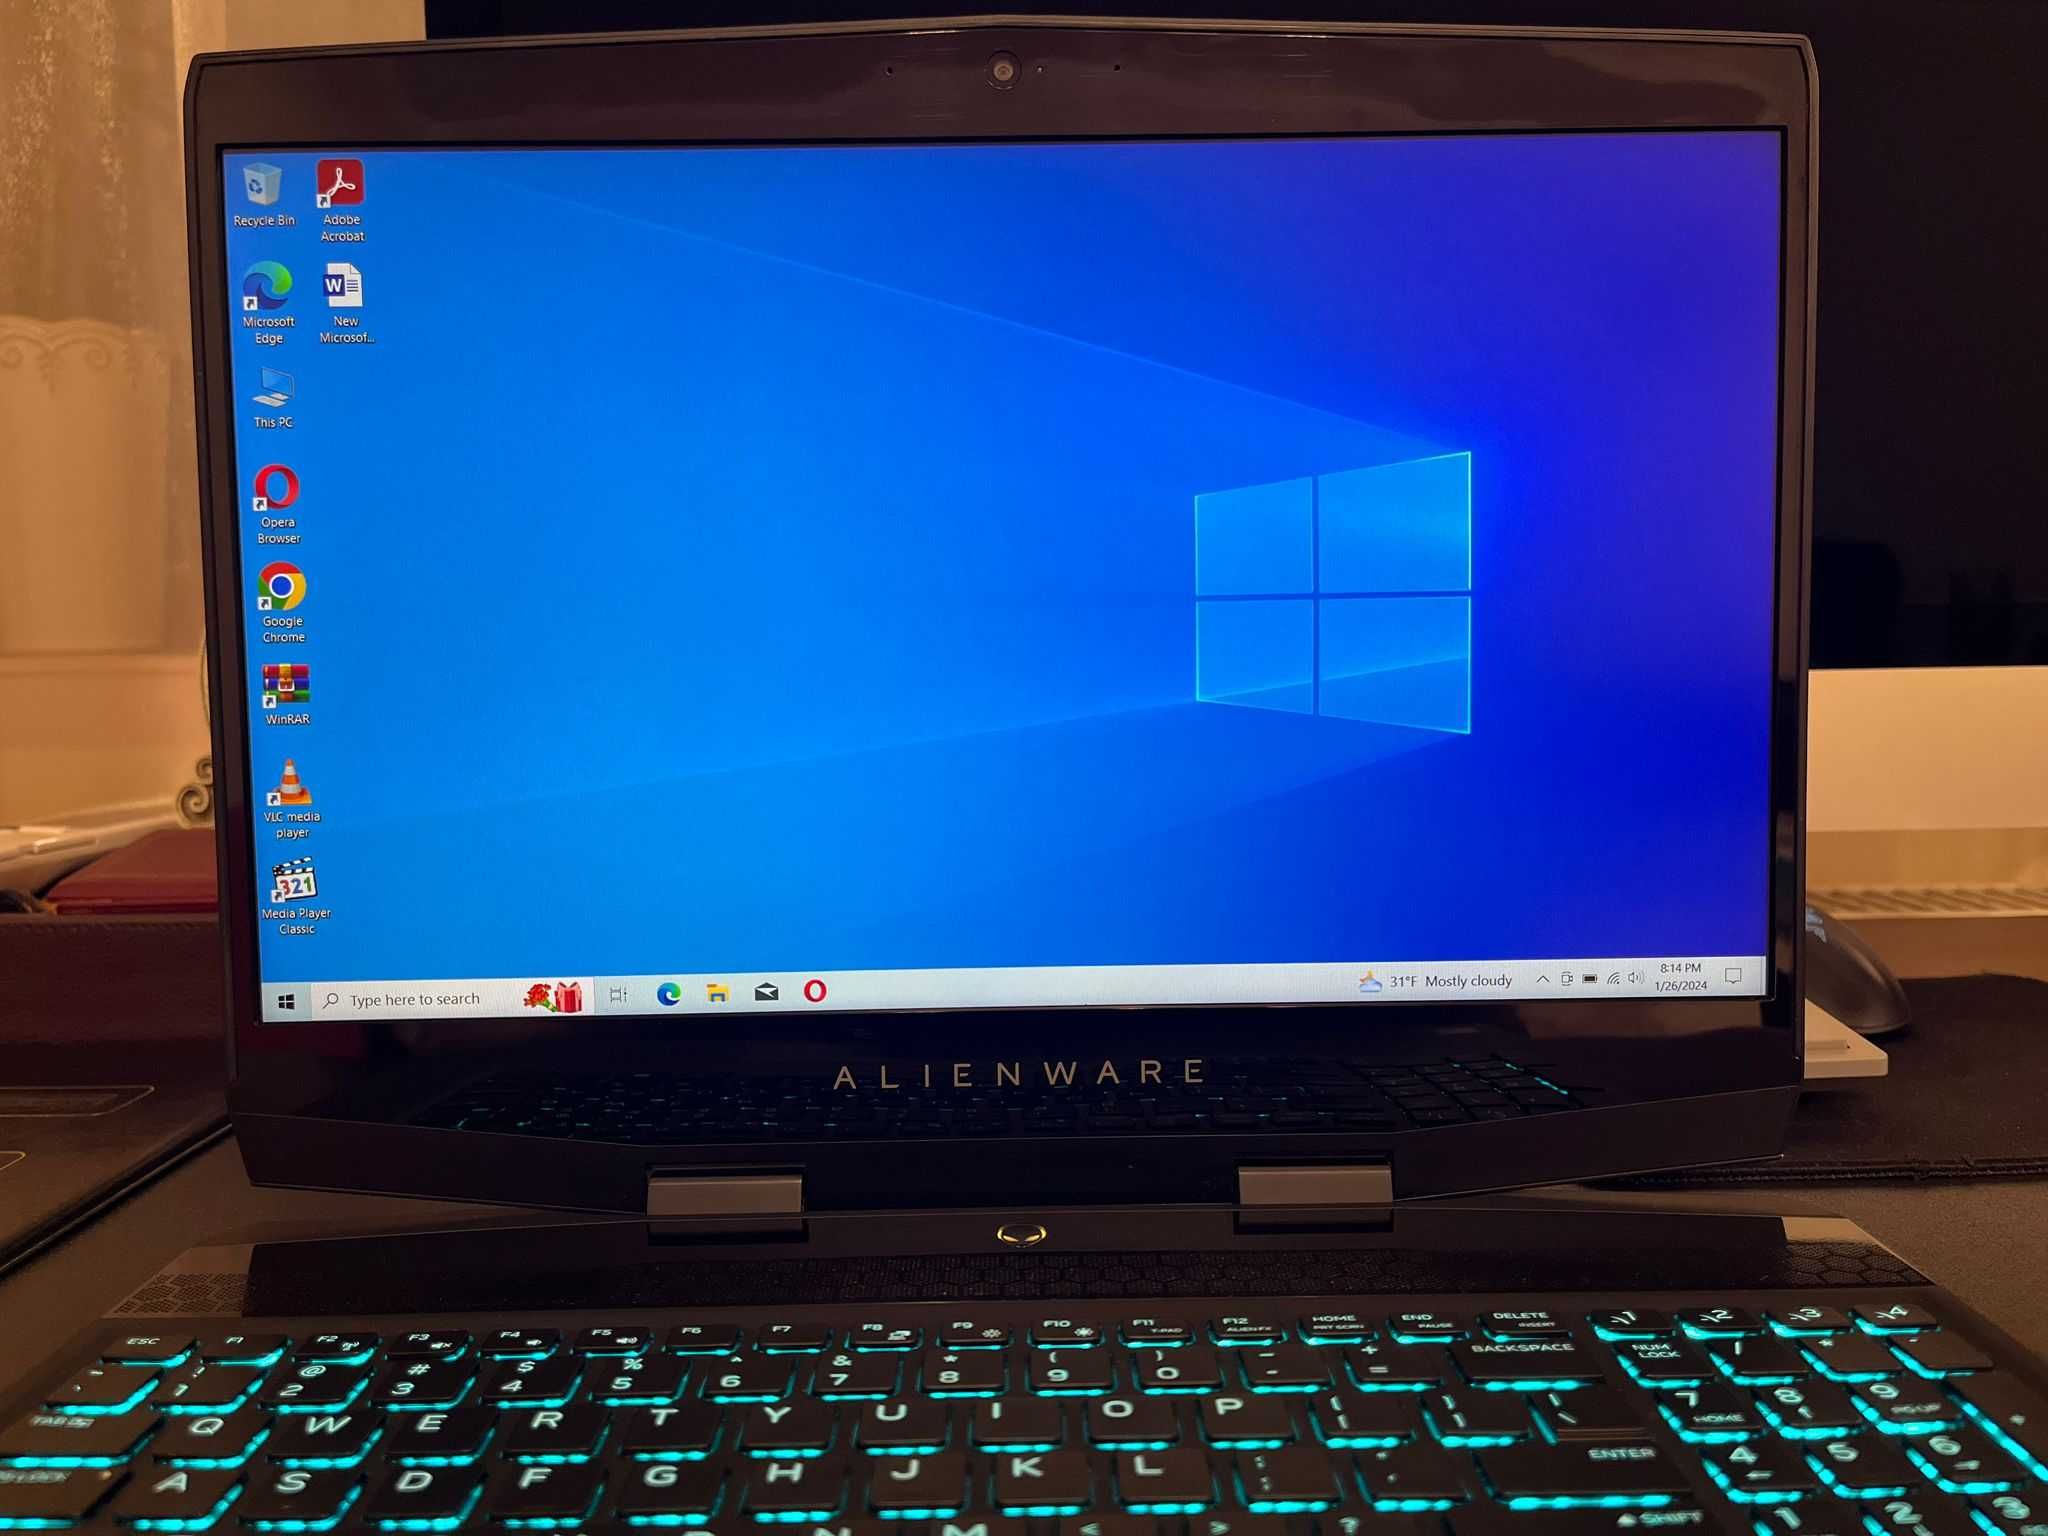 Dell Alienware m15 GAMING laptop